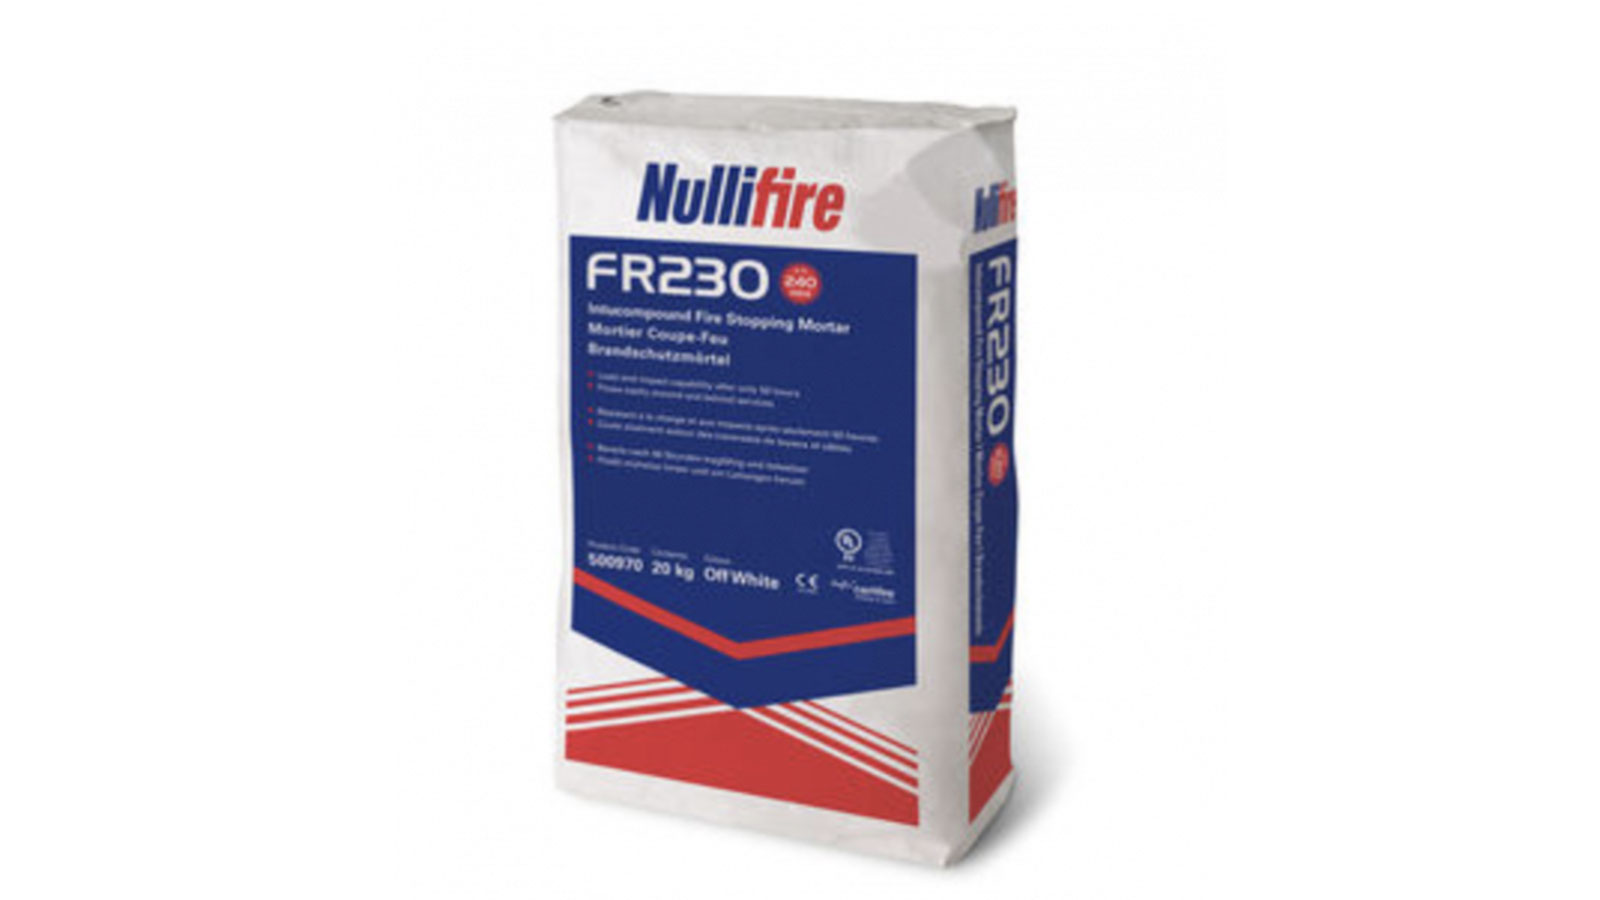 Unbeatable Fire Protection with FR230 Intucompound Fire Mortar from Nullifire & Dortech Direct